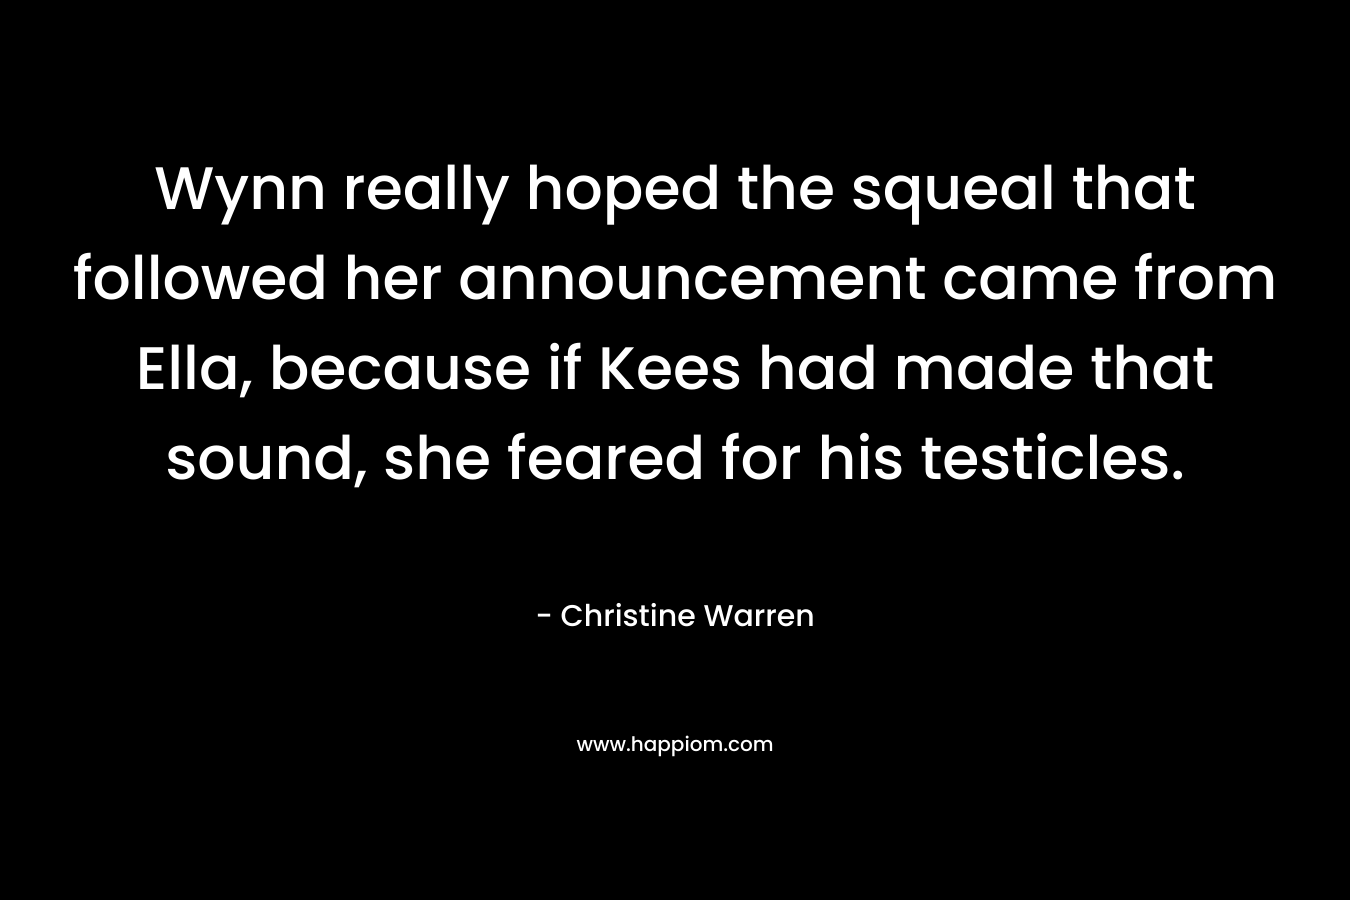 Wynn really hoped the squeal that followed her announcement came from Ella, because if Kees had made that sound, she feared for his testicles. – Christine Warren